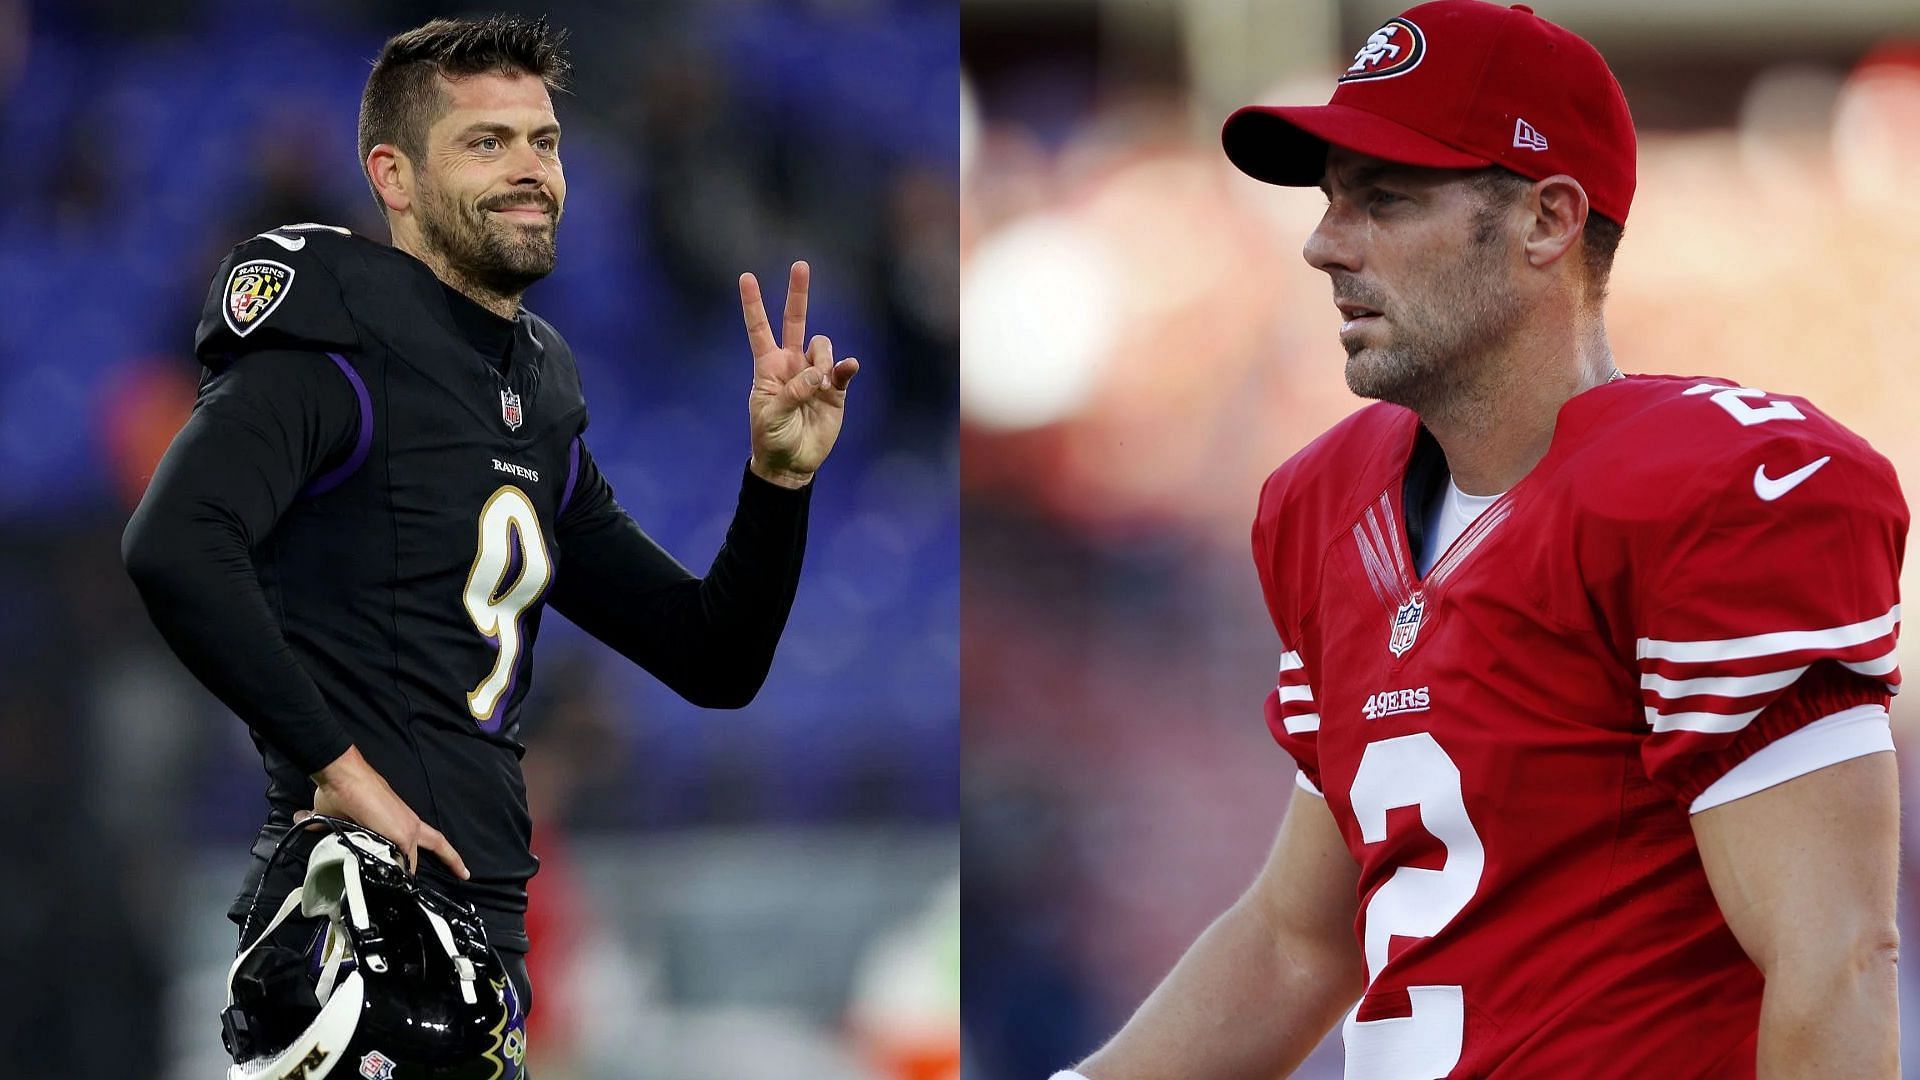 NFL placekickers Justin Tucker and David Akers